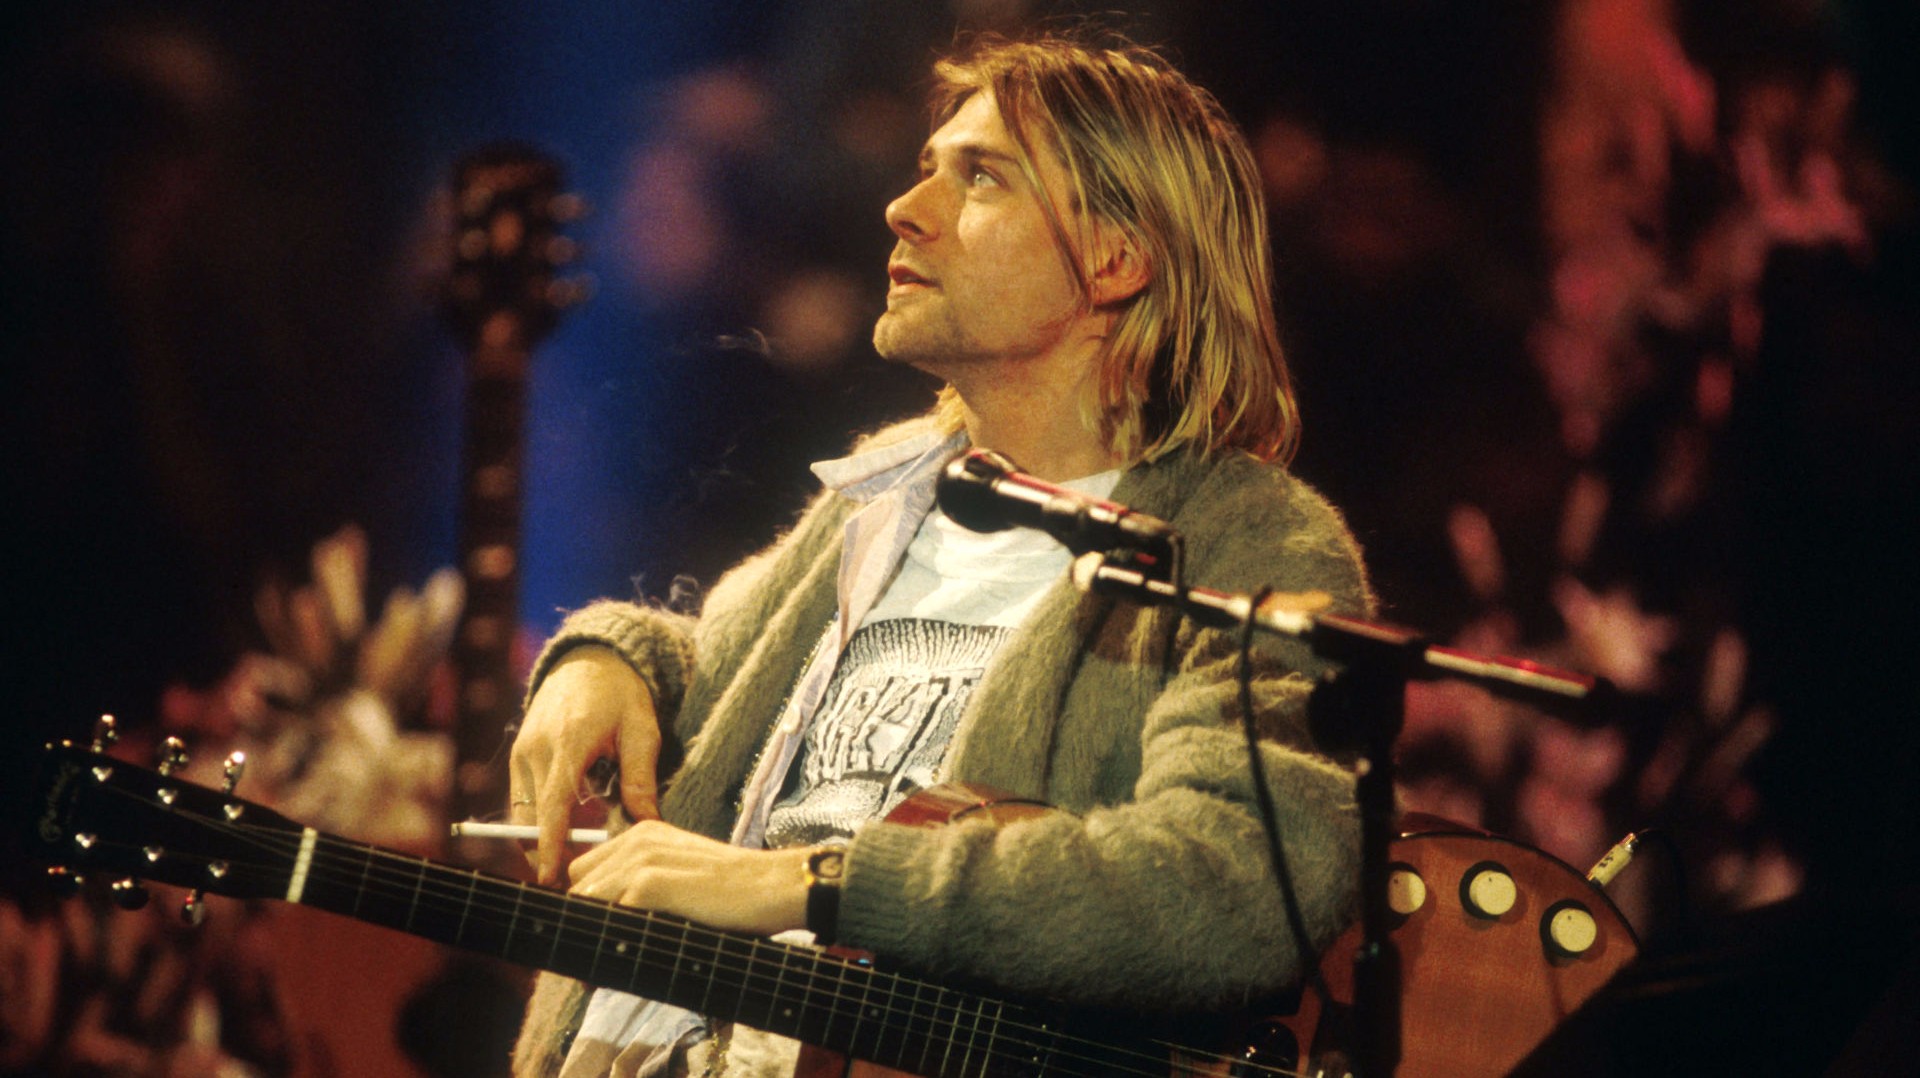 nirvana mtv unplugged video download completo